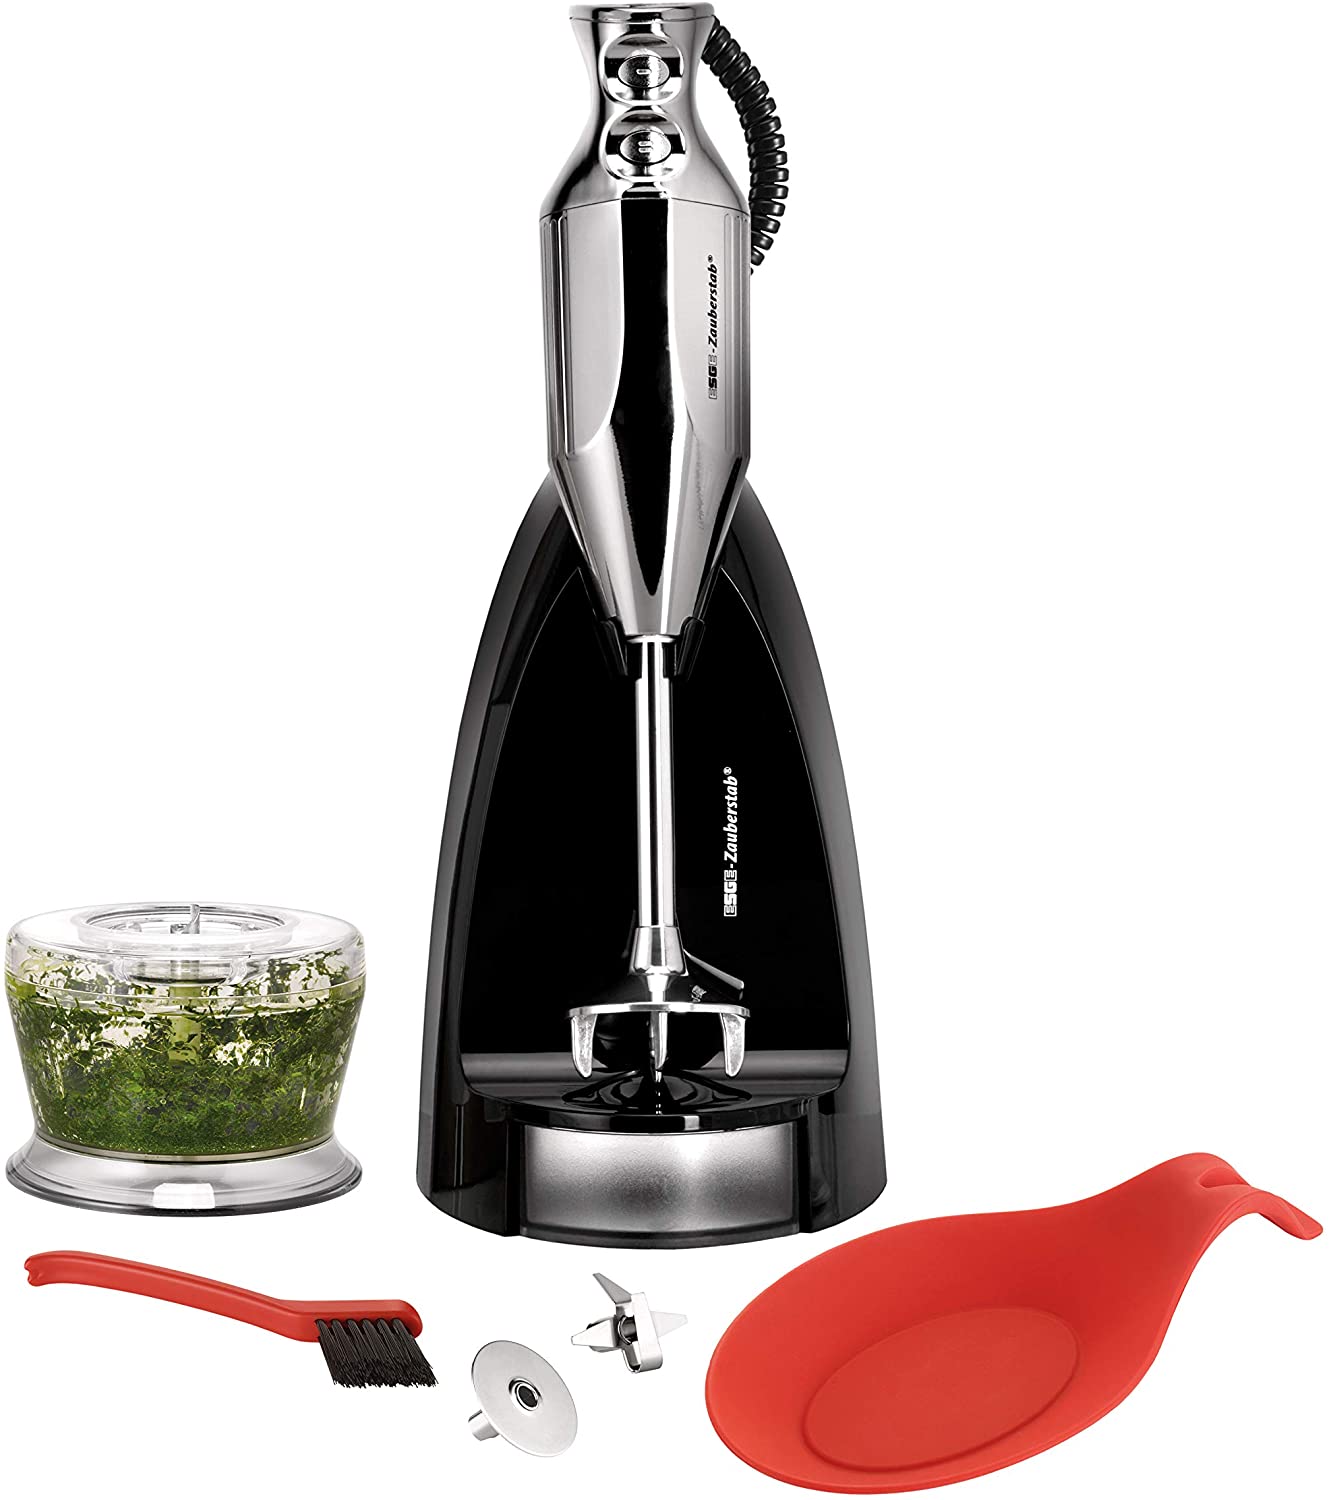 ESGE-Zauberstab M 200 chrome, hand blender with durable AC motor, 23 cm immersion depth, 200 W and up to 17,000 rpm, 90580 90580 (4011689905 Blenderis